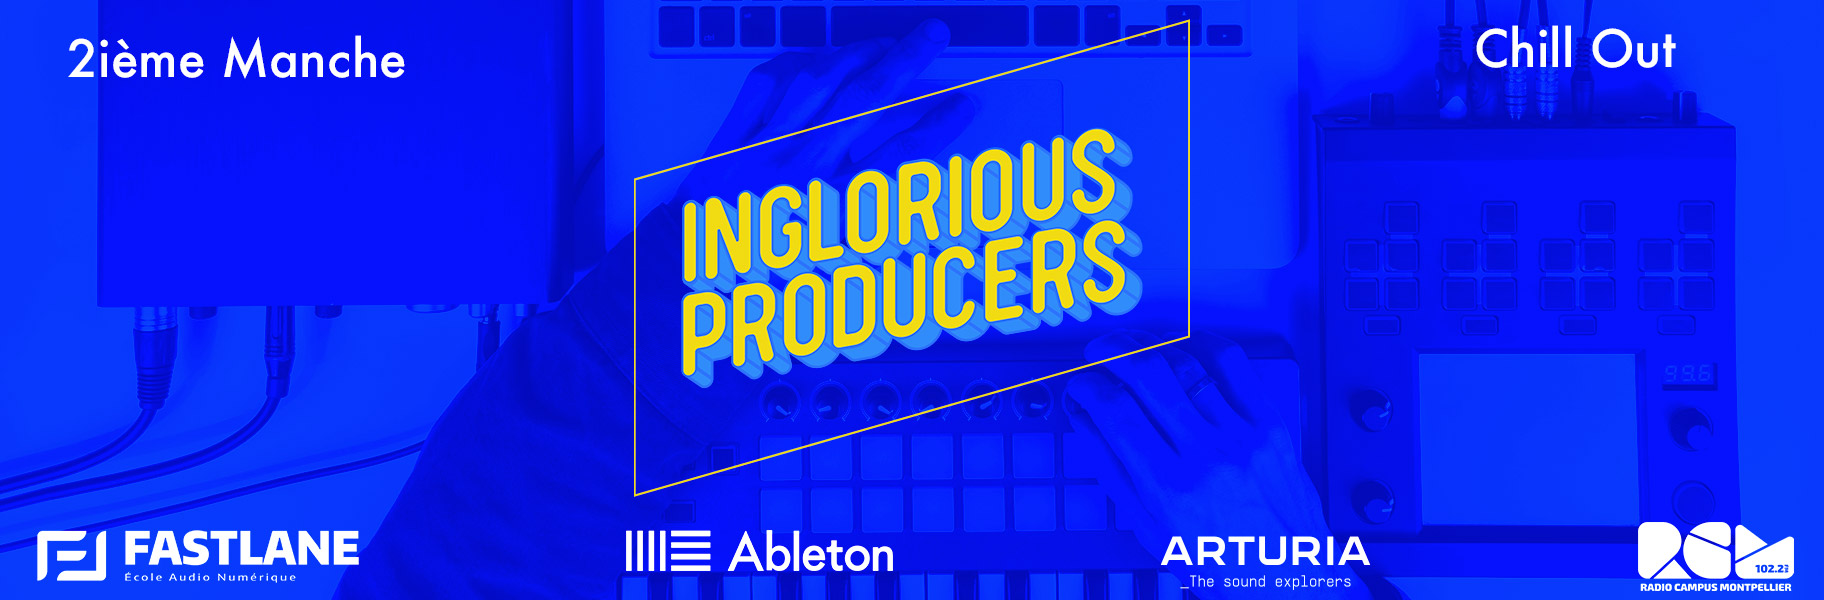 Inglorious Producers-2ieme manche